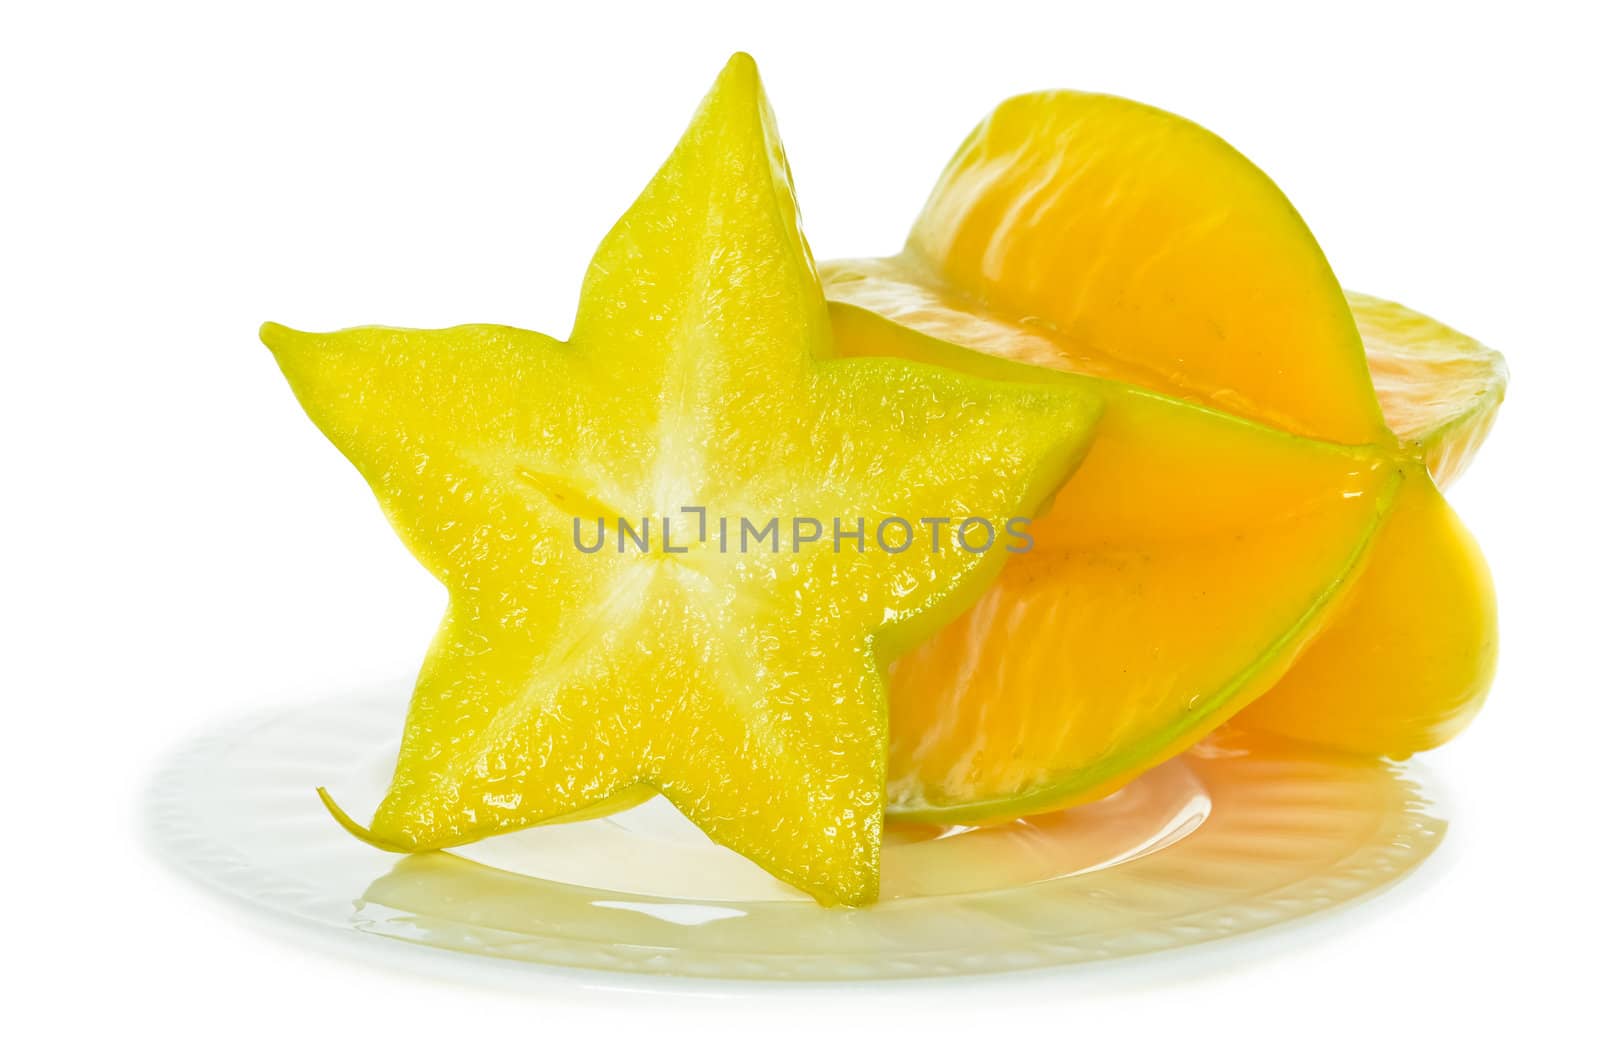 The star fruit is rich in juice.